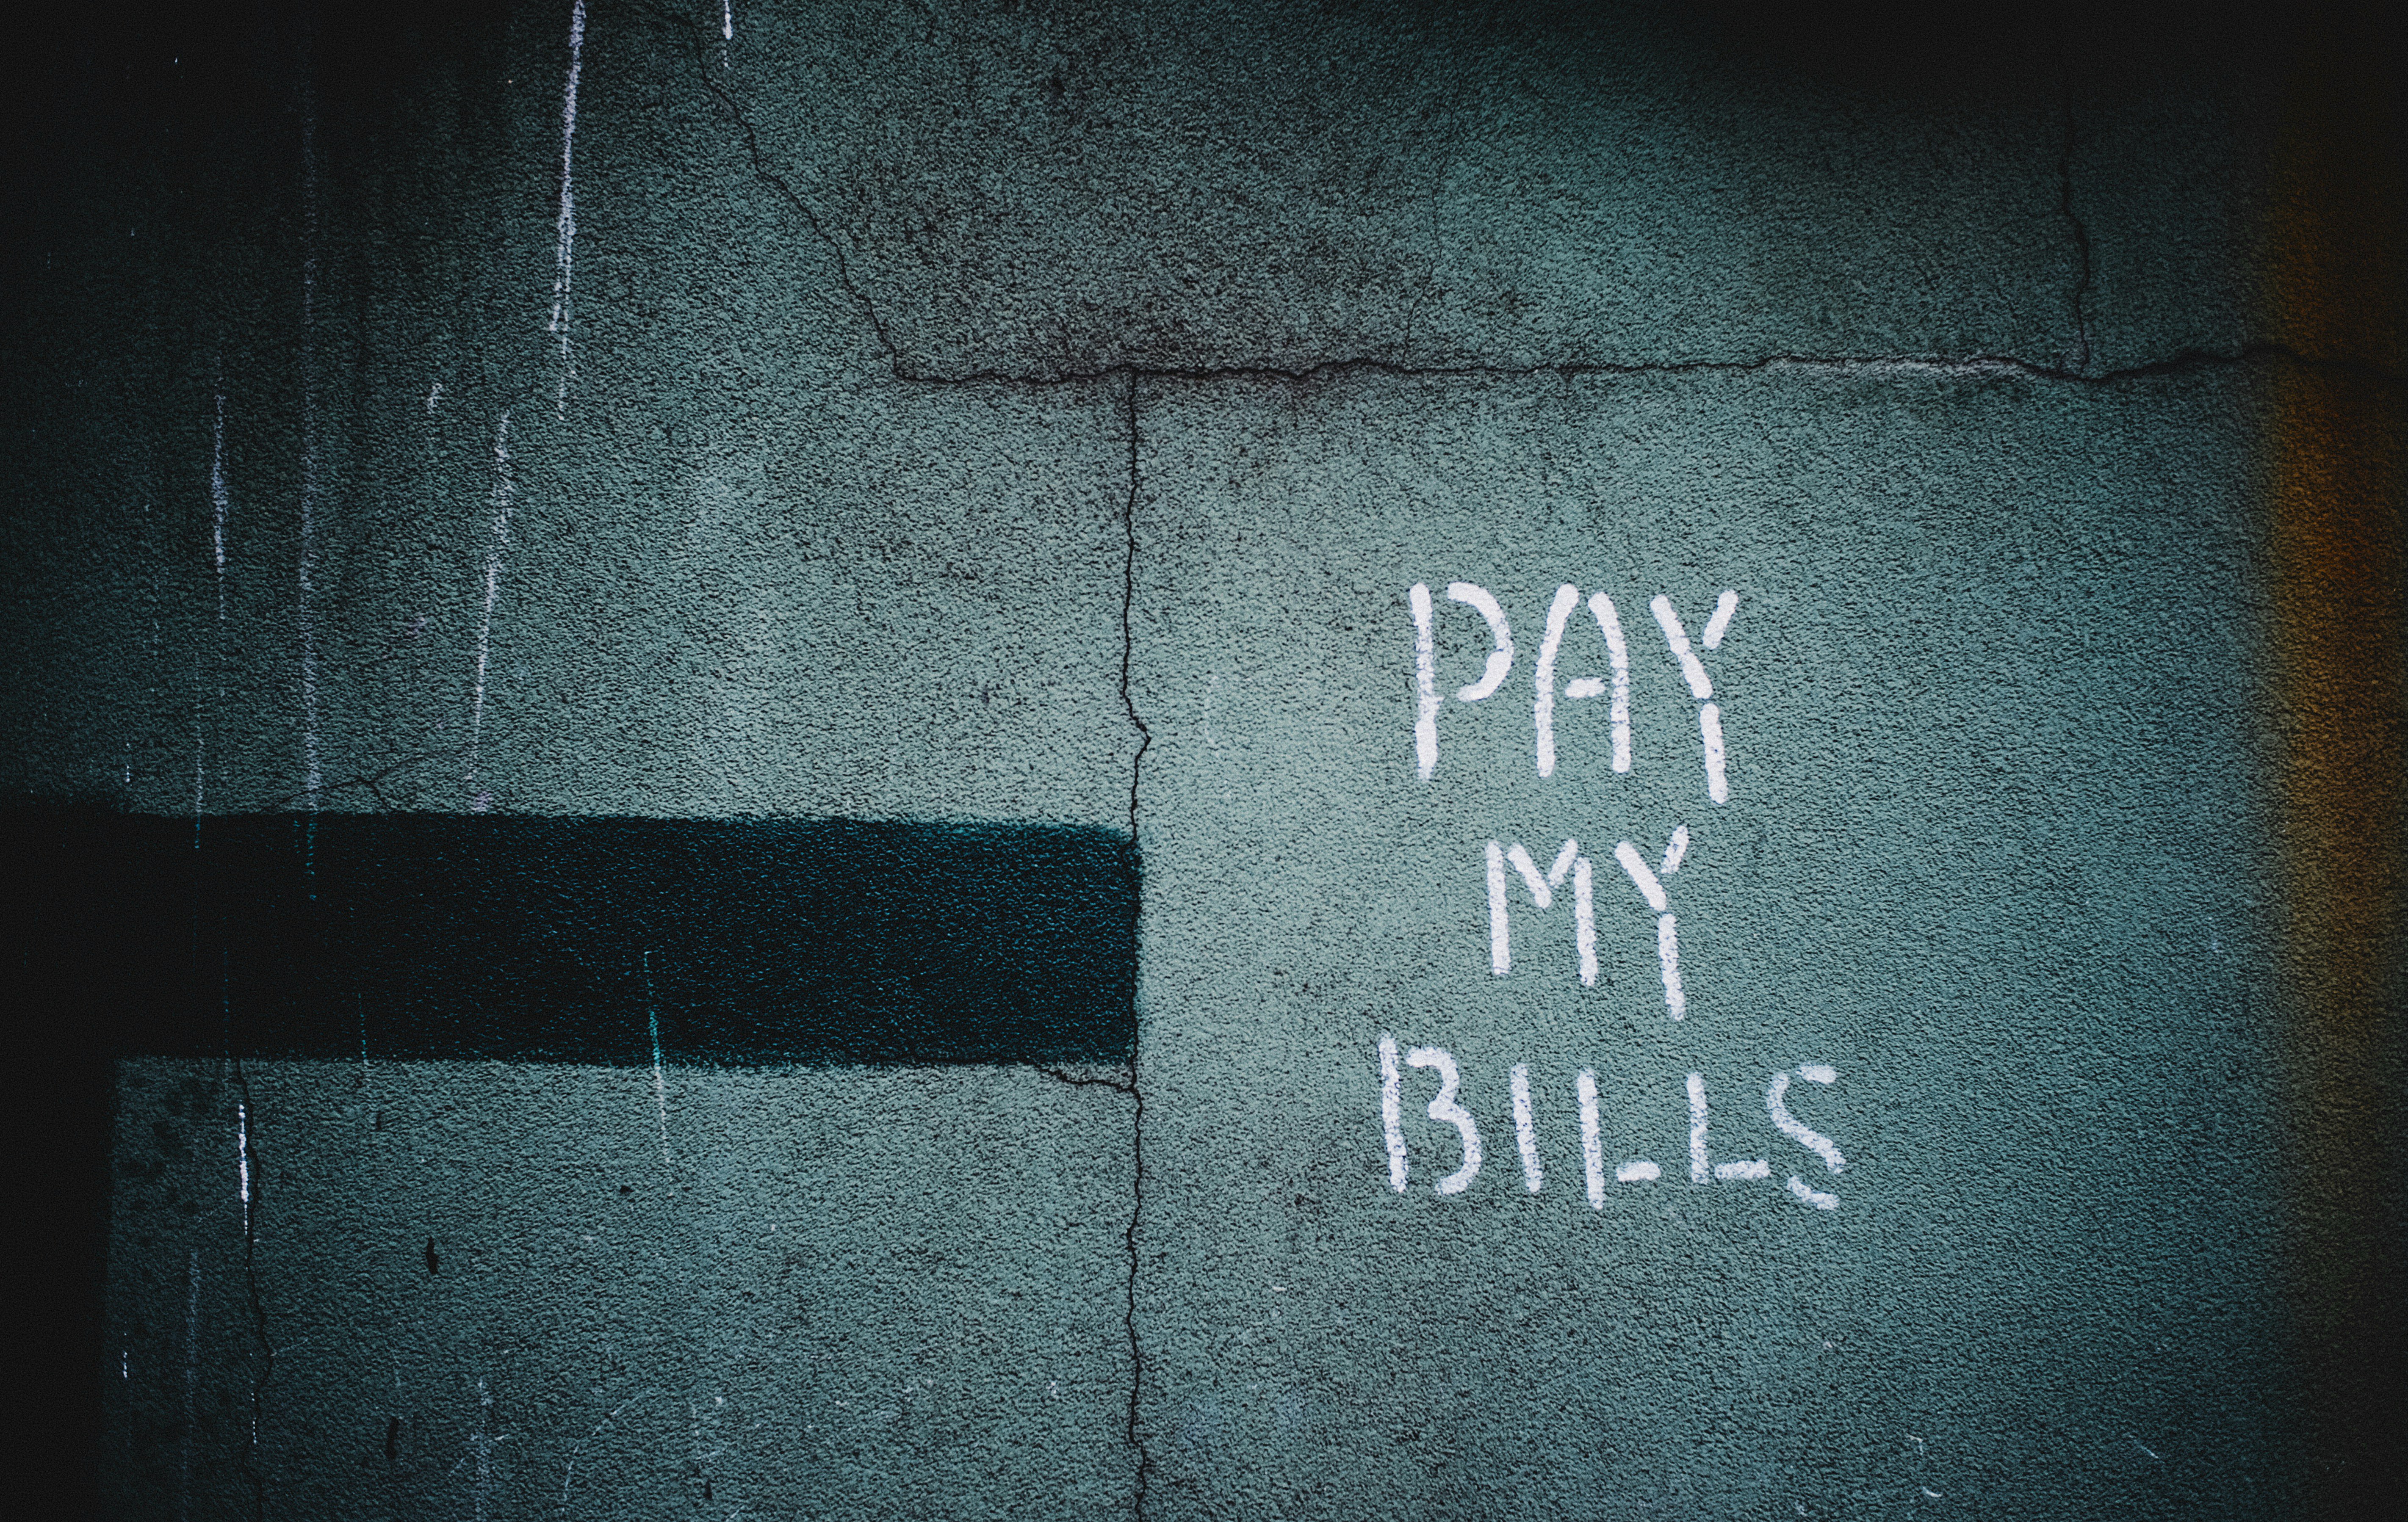 shallow focus photo of wall with pay my bills paint